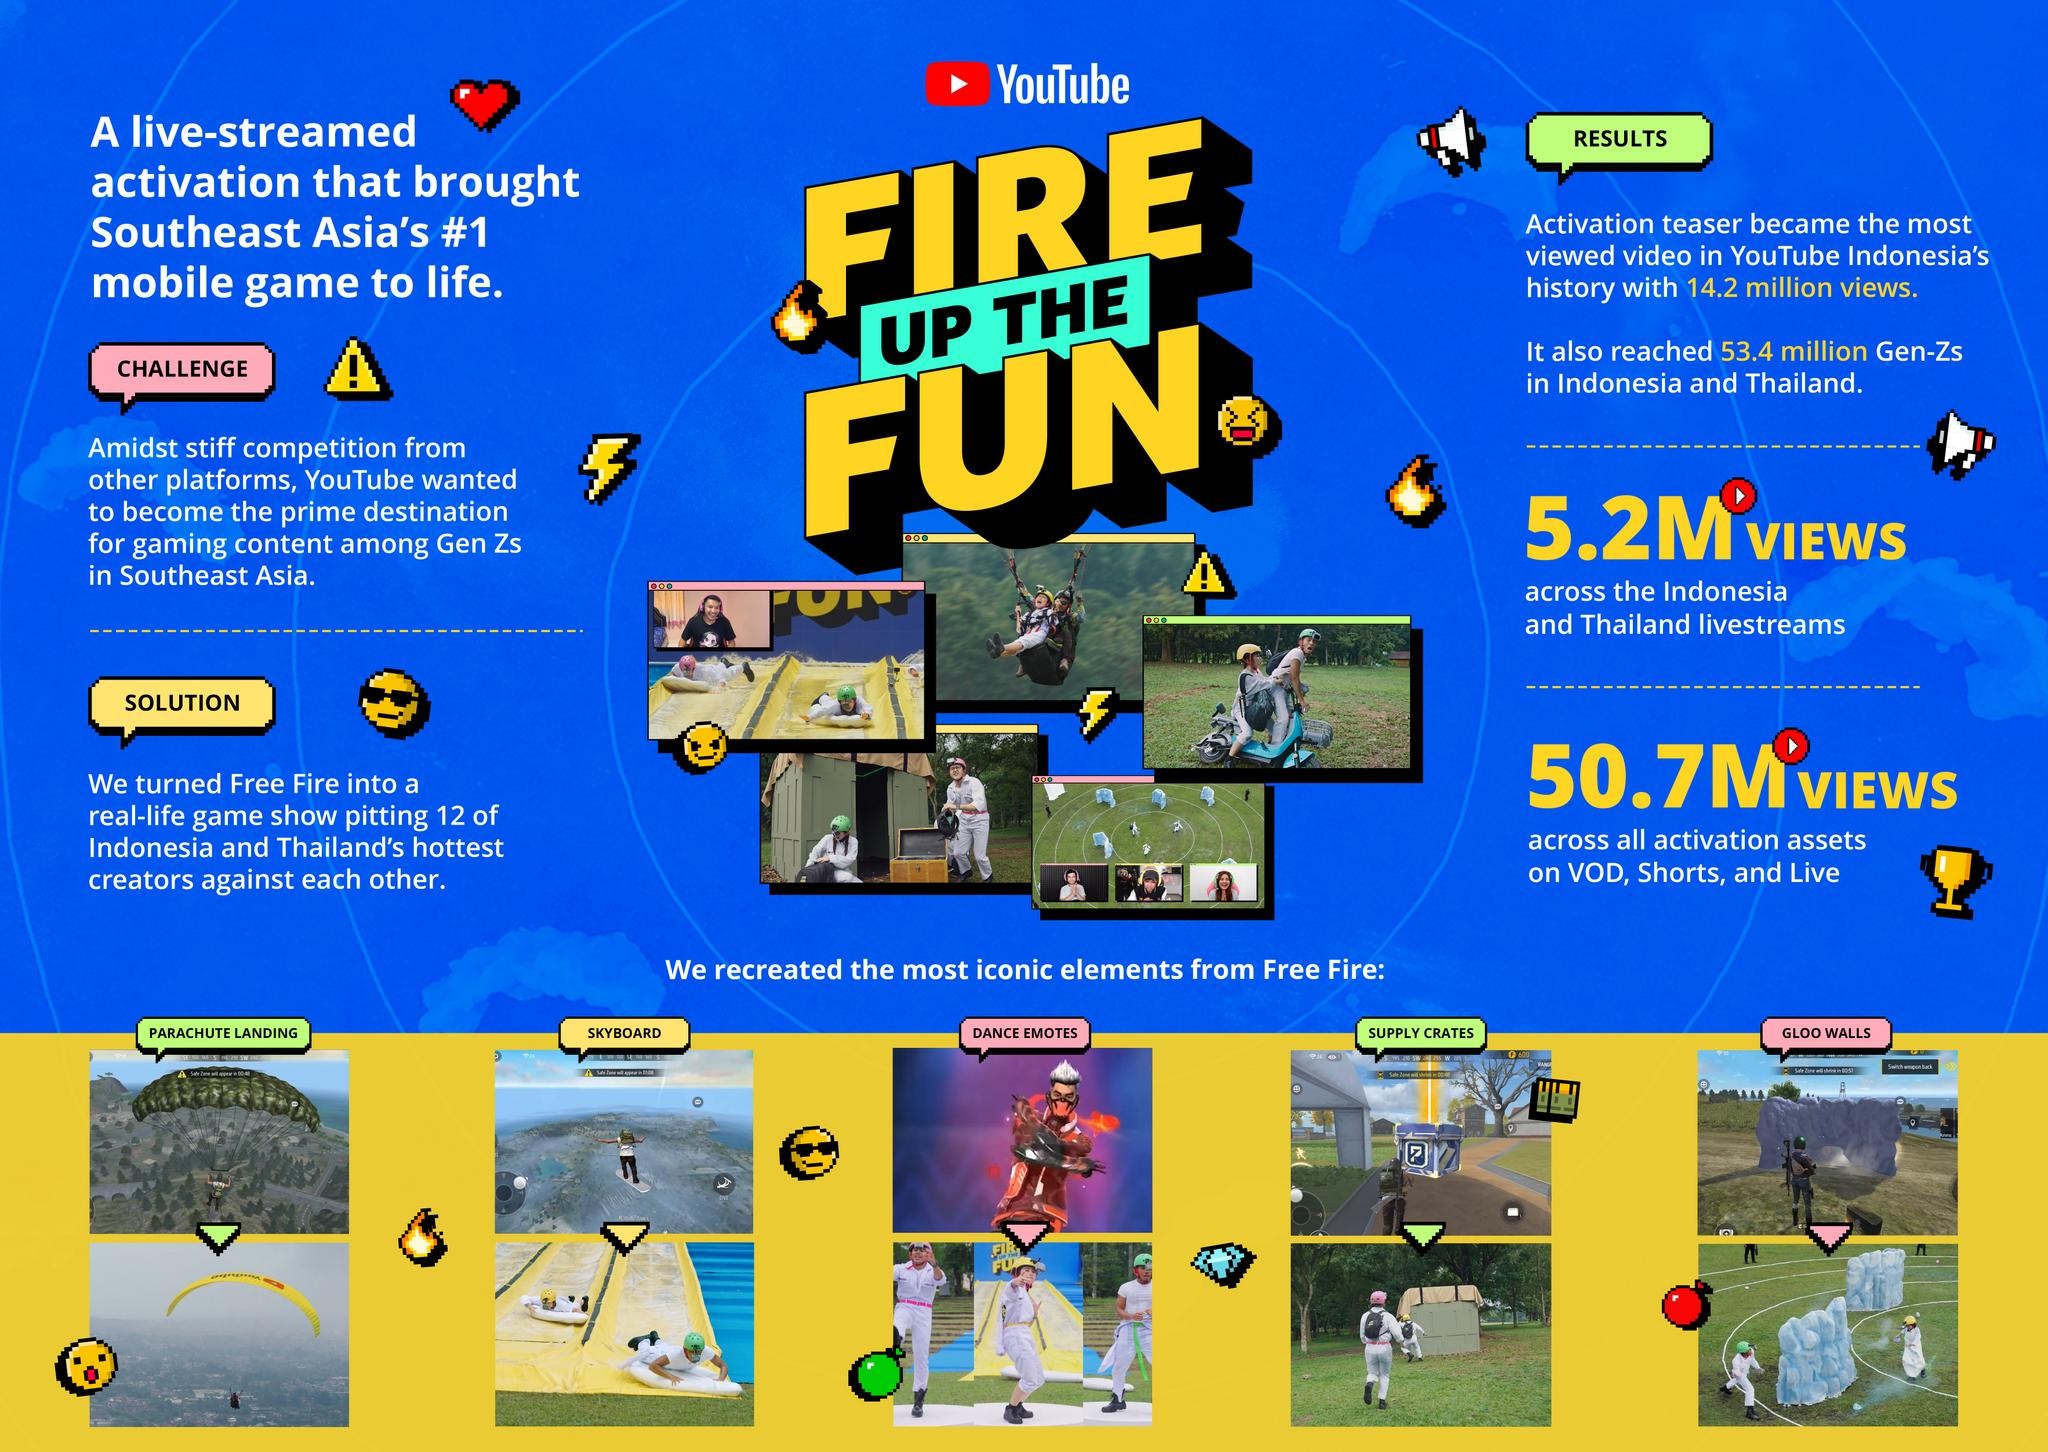 Fire Up The Fun - Bringing Southeast Asia's #1 Mobile Game To Life 600 Feet High